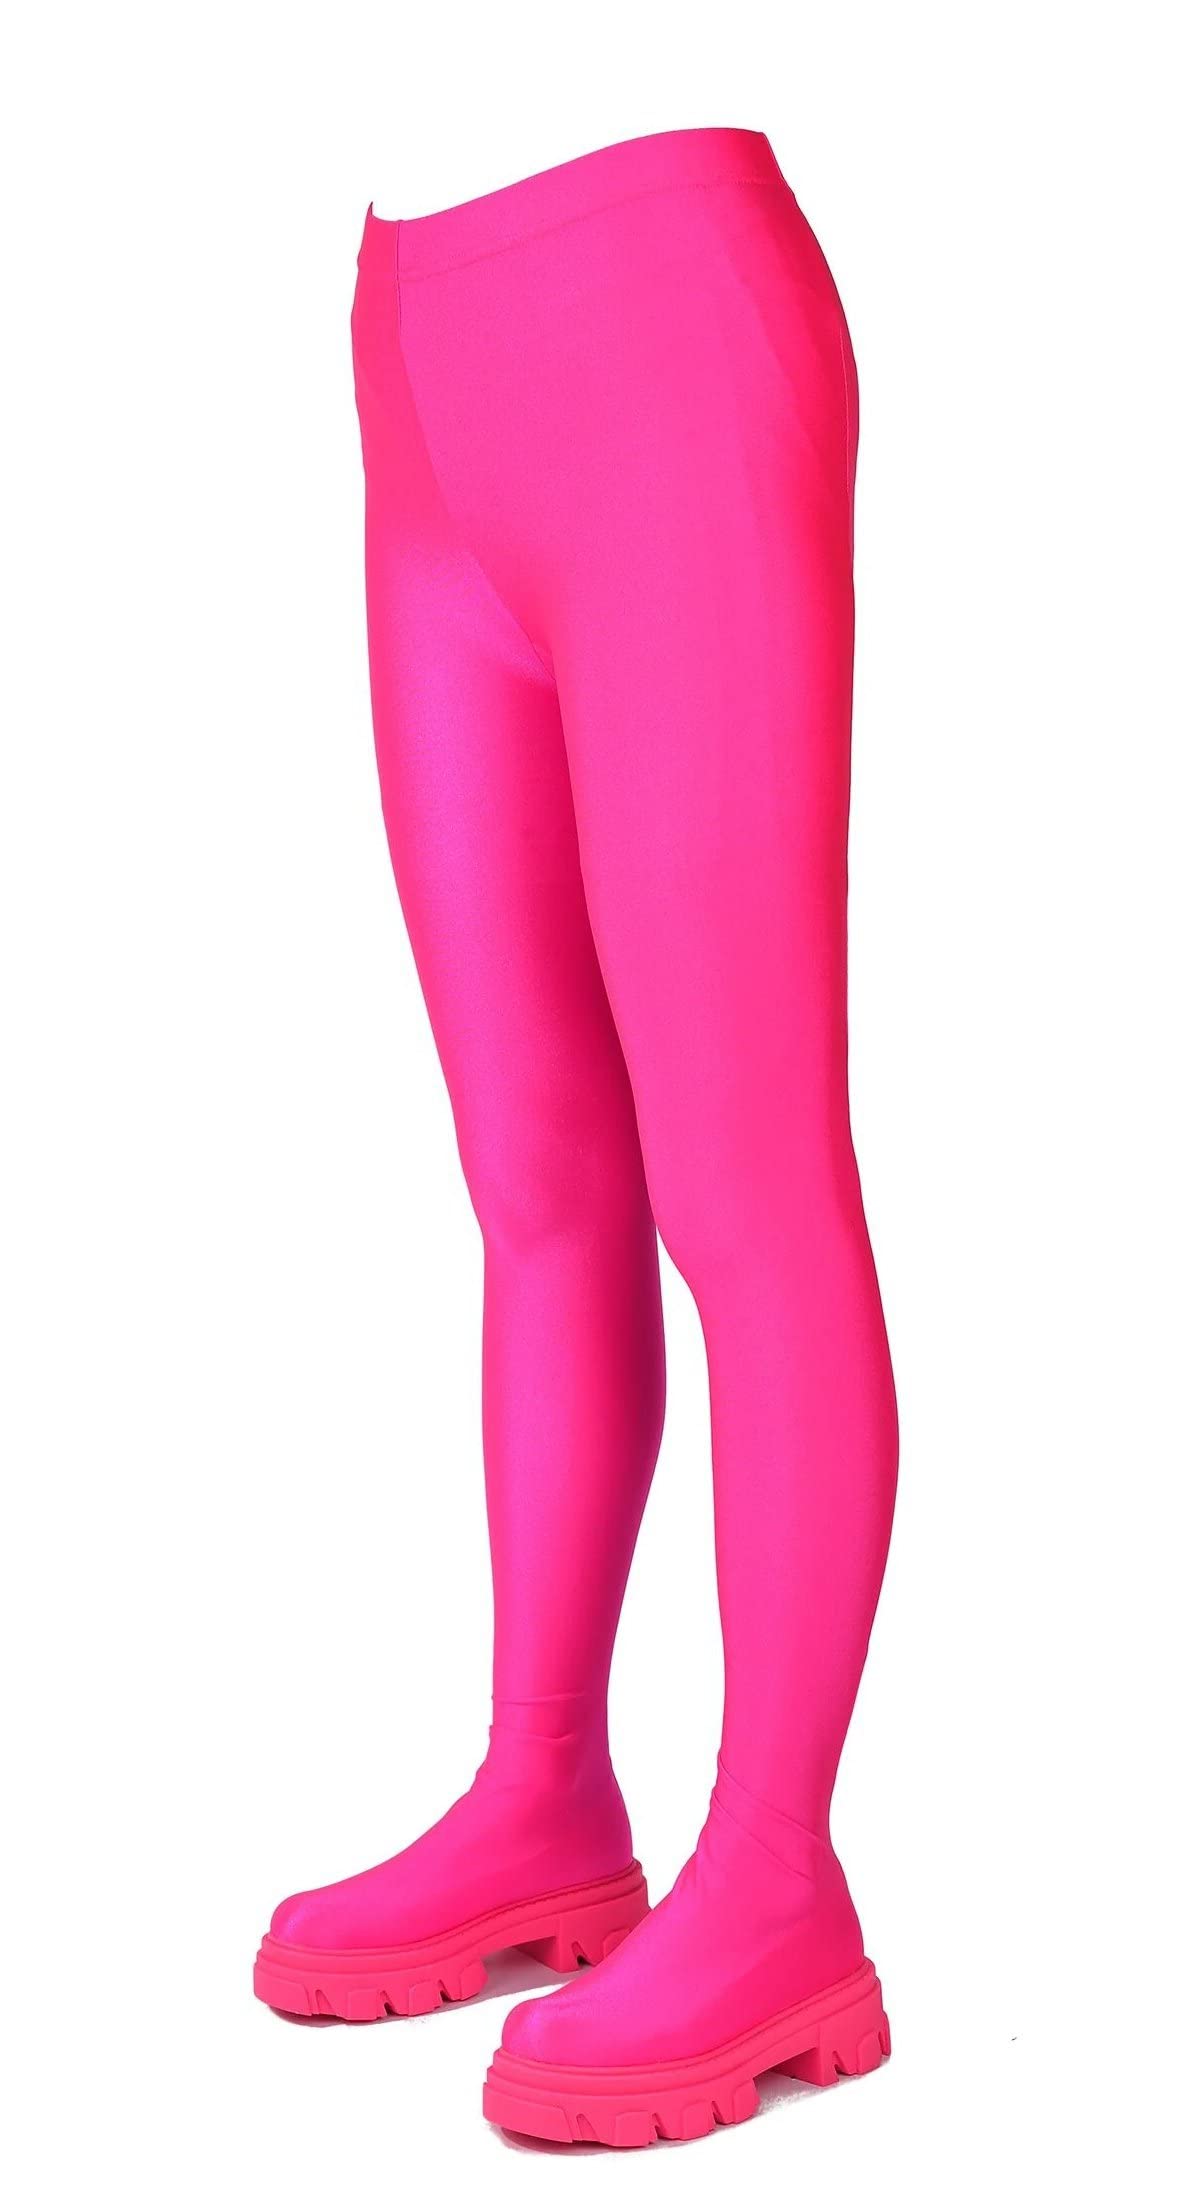 Cape Robbin Devons Pants Chunky Lug Sole Rounded Toe Pull On Lycra Legging Boots (Pink, 10)